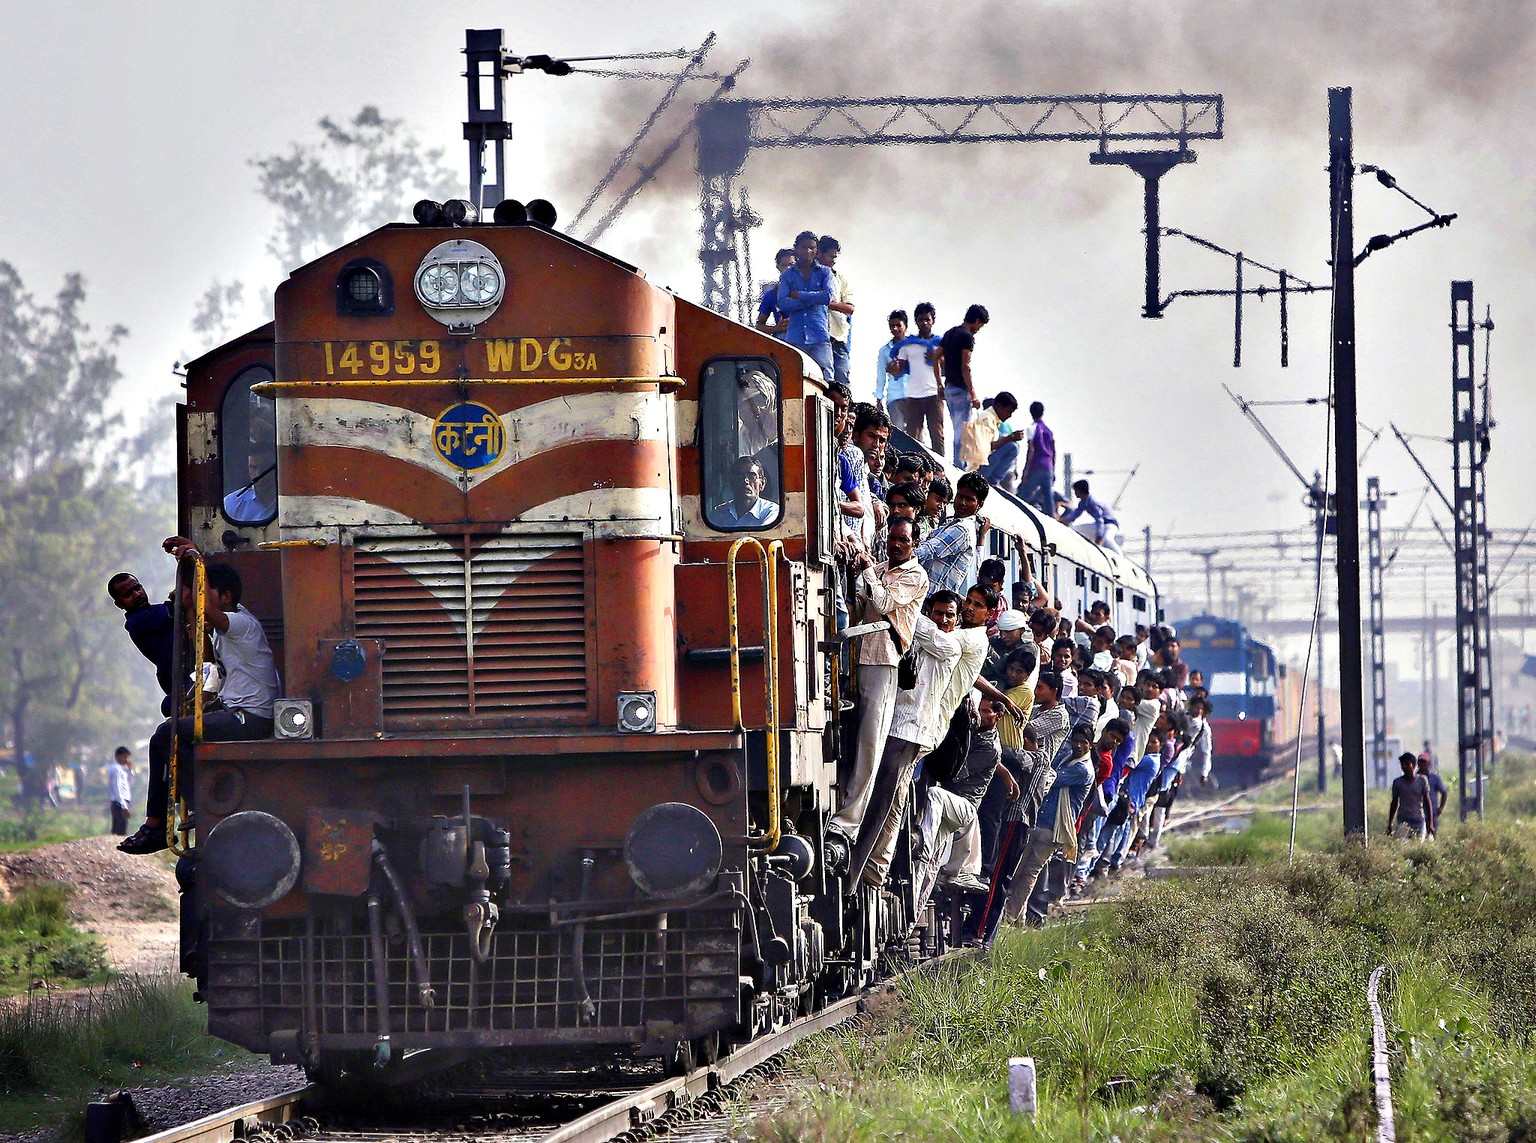 Passengers travel on an overcrowded train at Loni town in Uttar Pradesh...Passengers travel on an overcrowded train at Loni town in the northern Indian state of Uttar Pradesh July 8, 2014. On Tuesday, ...